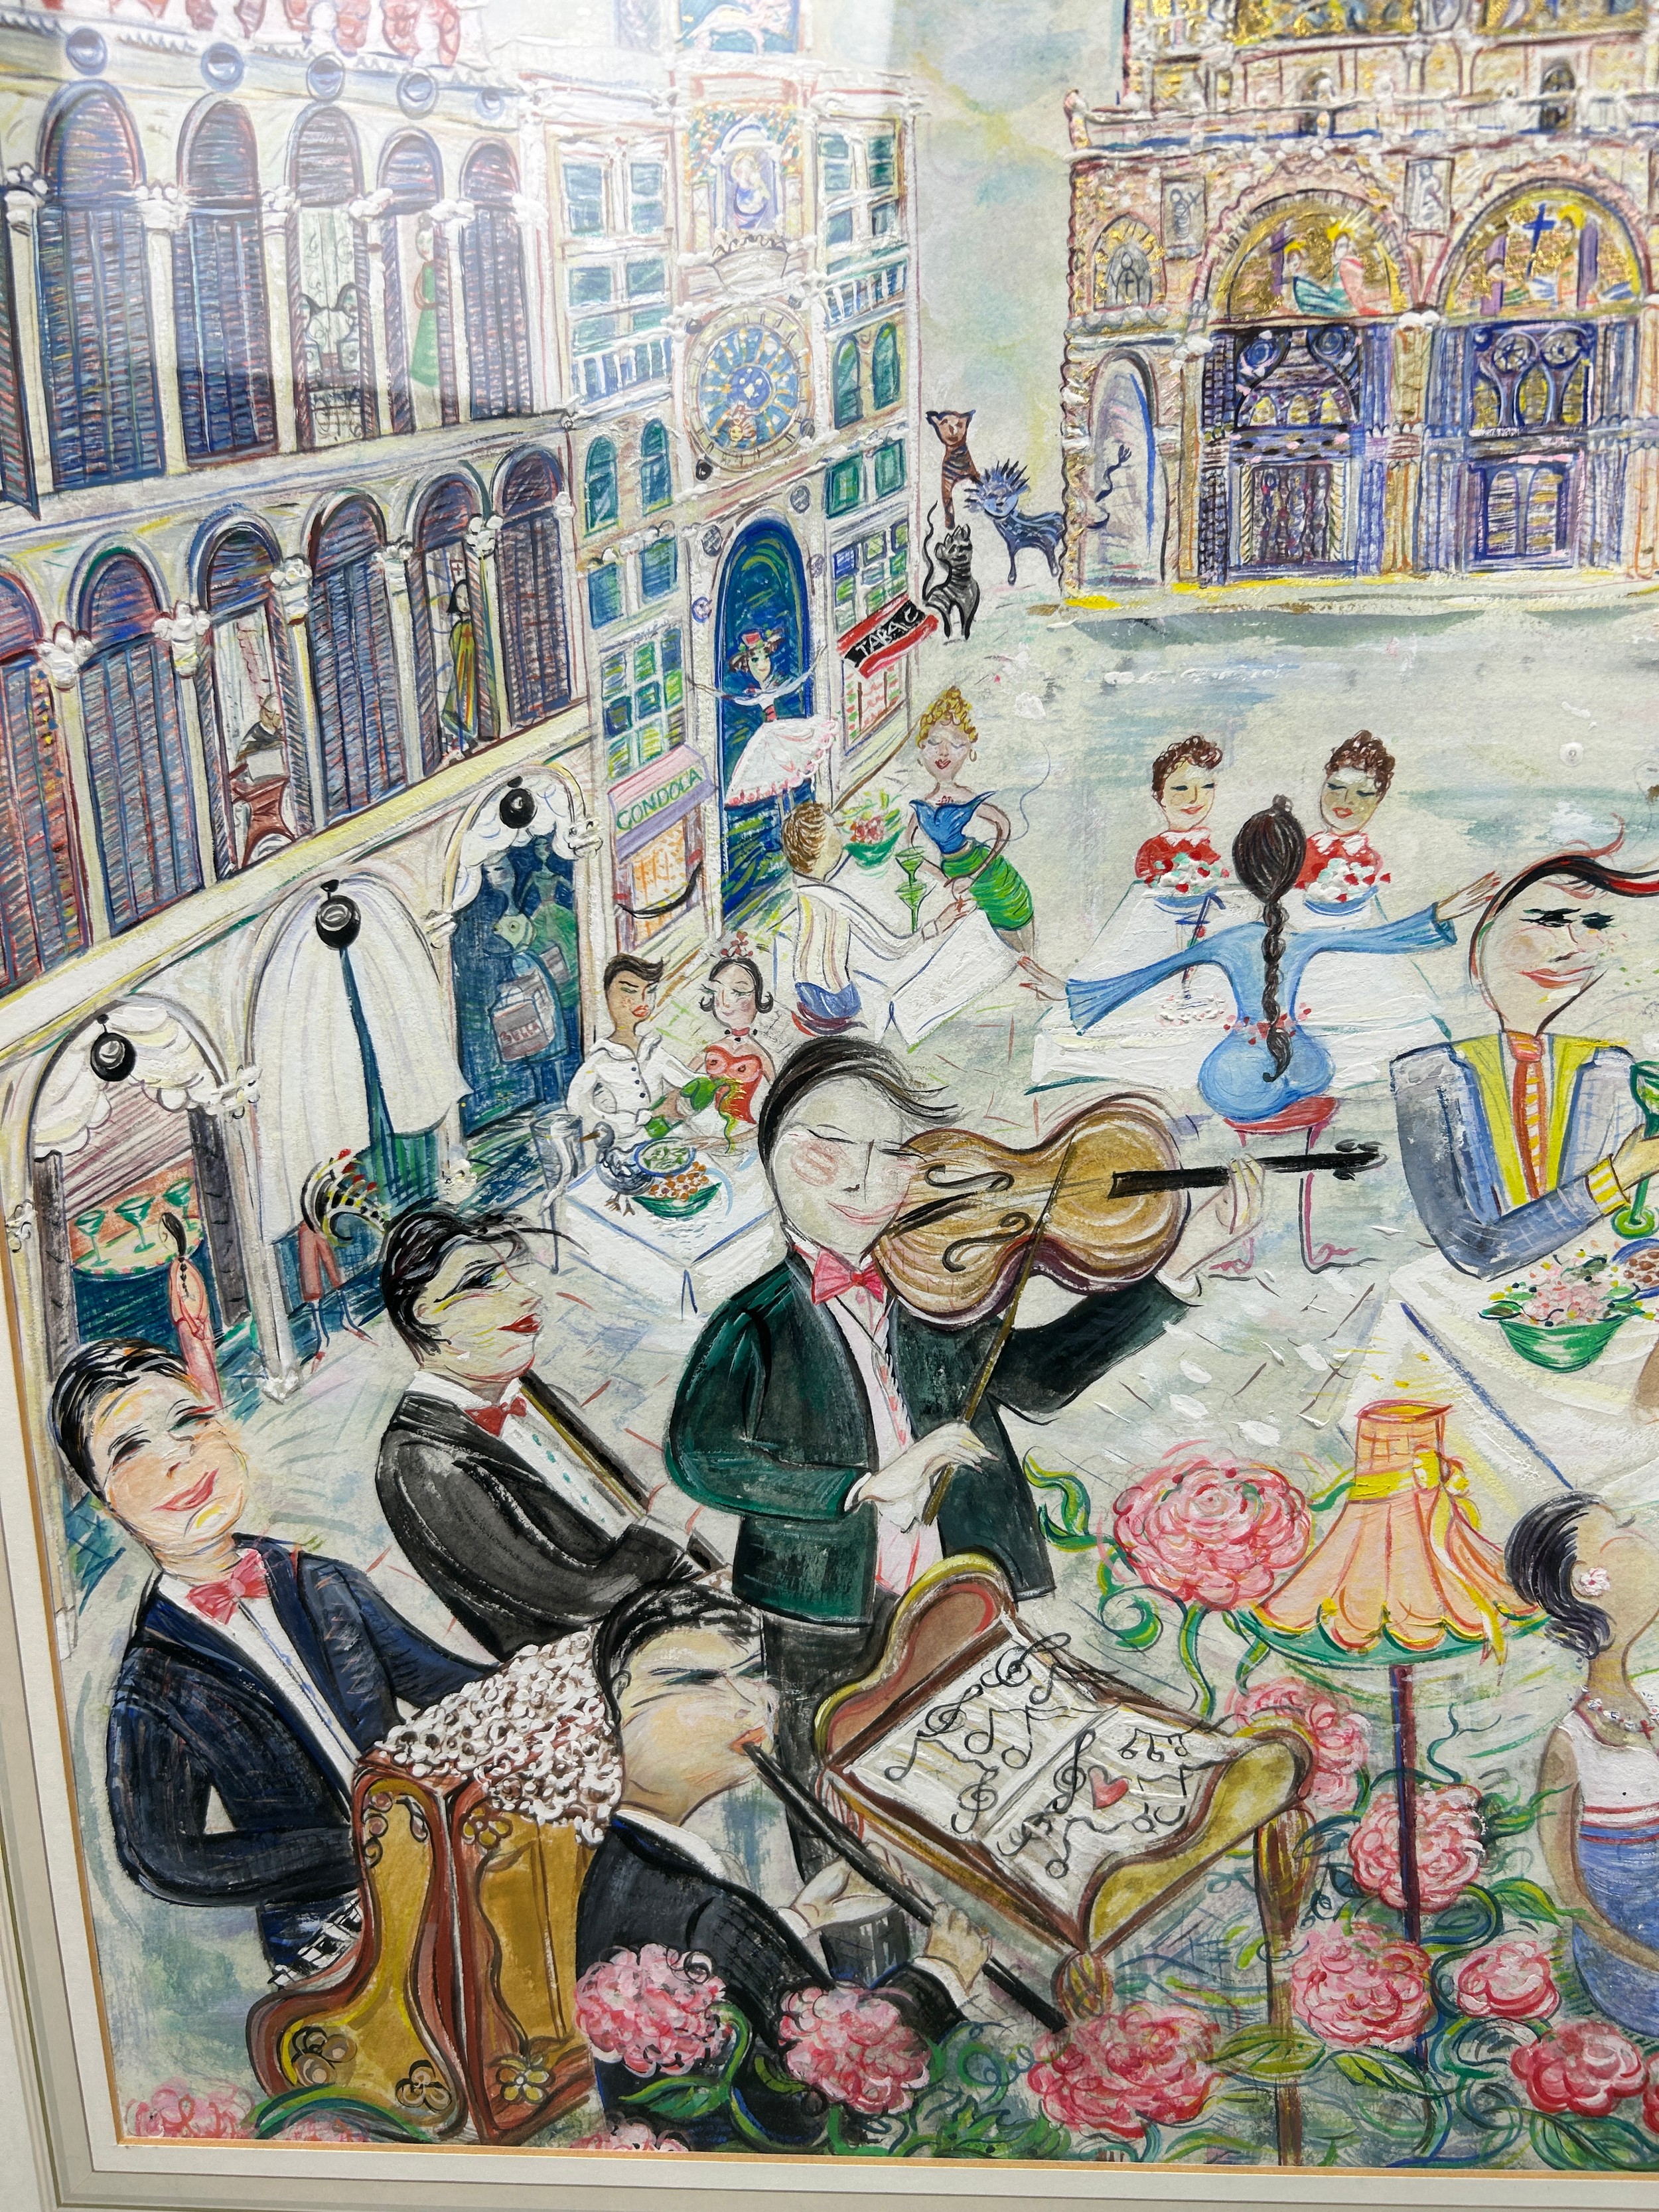 A LARGE WATERCOLOUR PAINTING ON PAPER OF MUSICIANS IN A SQUARE PROBABLY FLORENCE OR VENICE, ITALY - Image 4 of 7